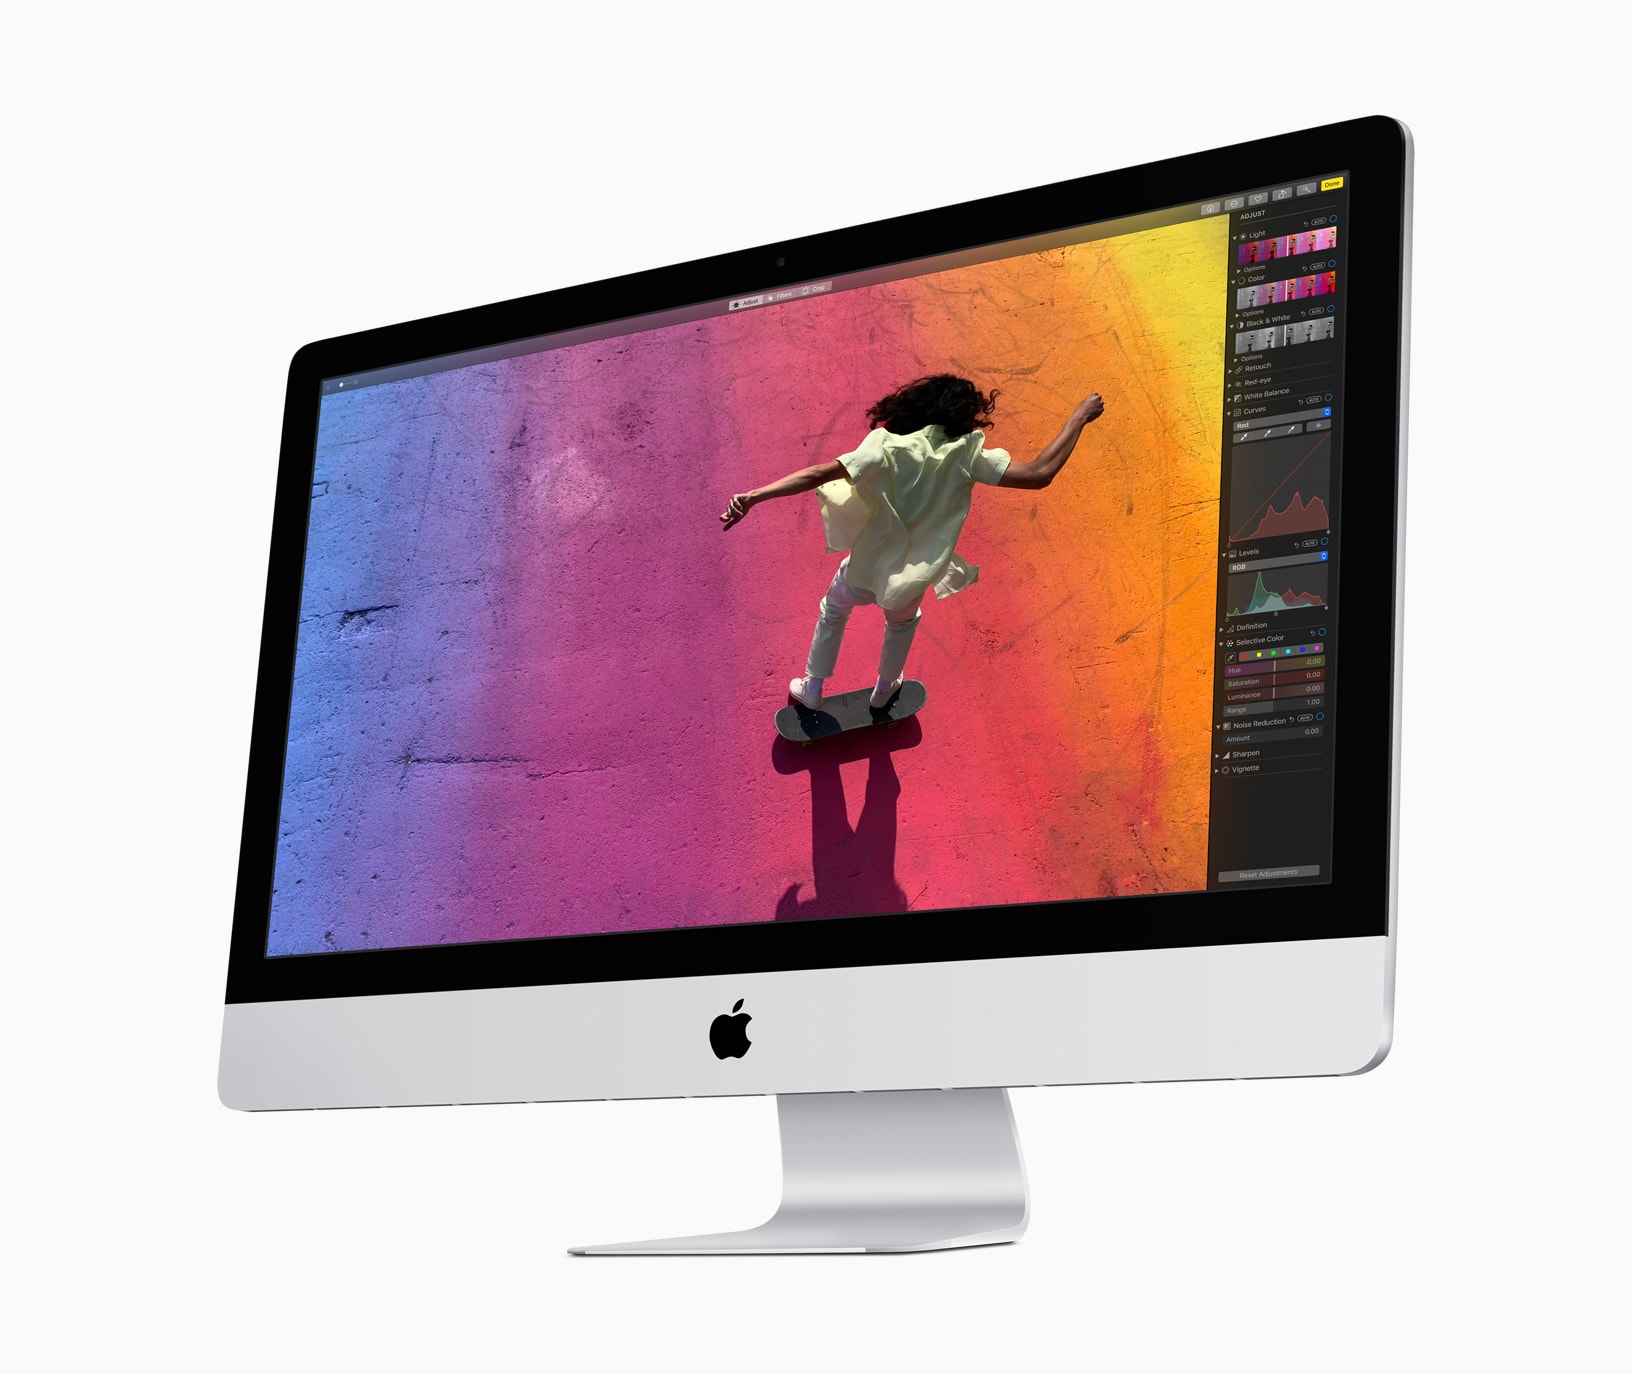 Apple’s biggest and best iMac yet could come in 2019.